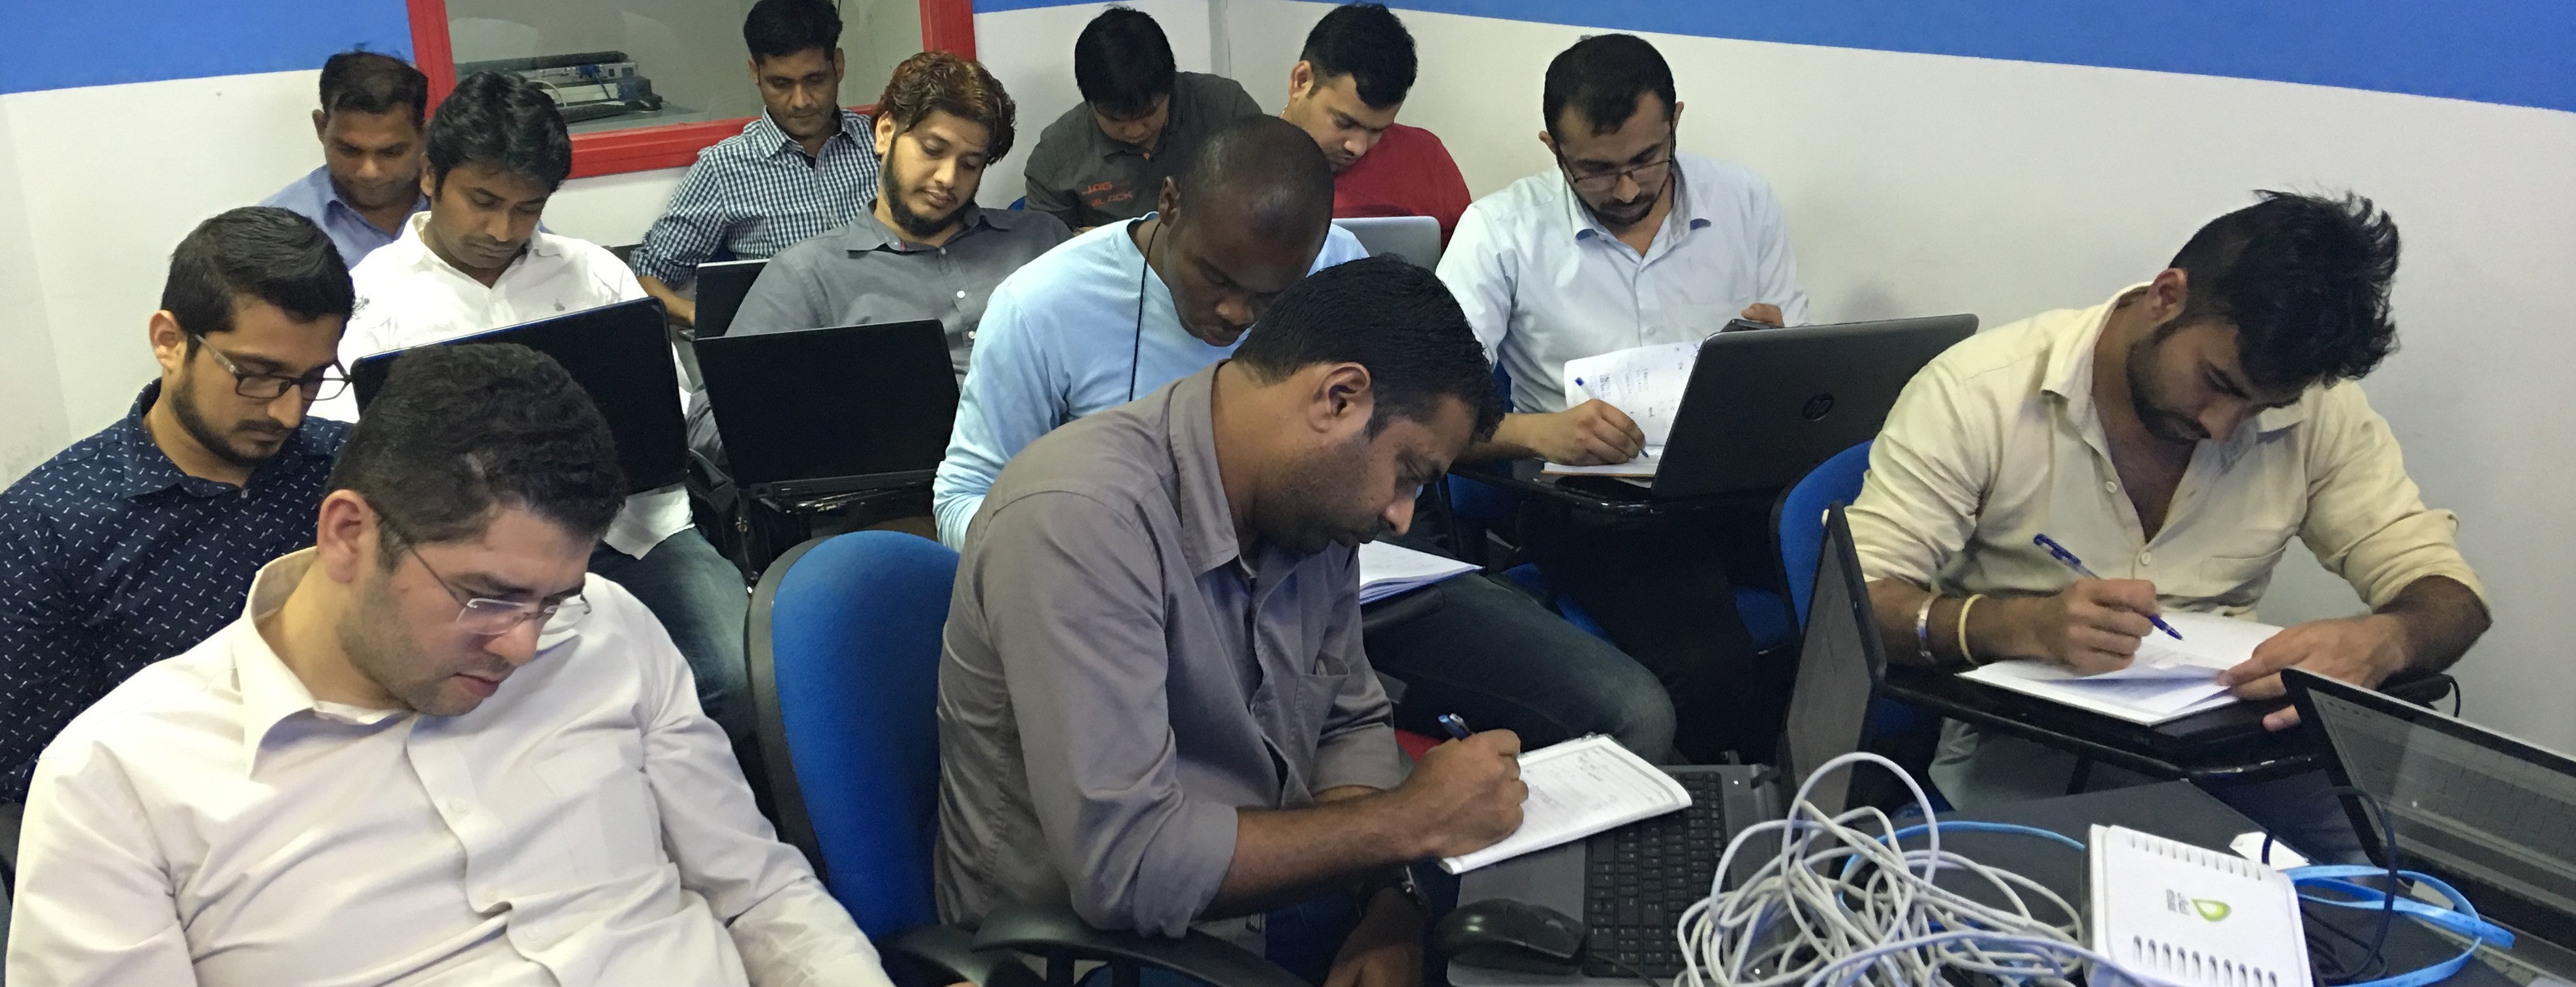 Training for Certified Solutions expert in Dubai